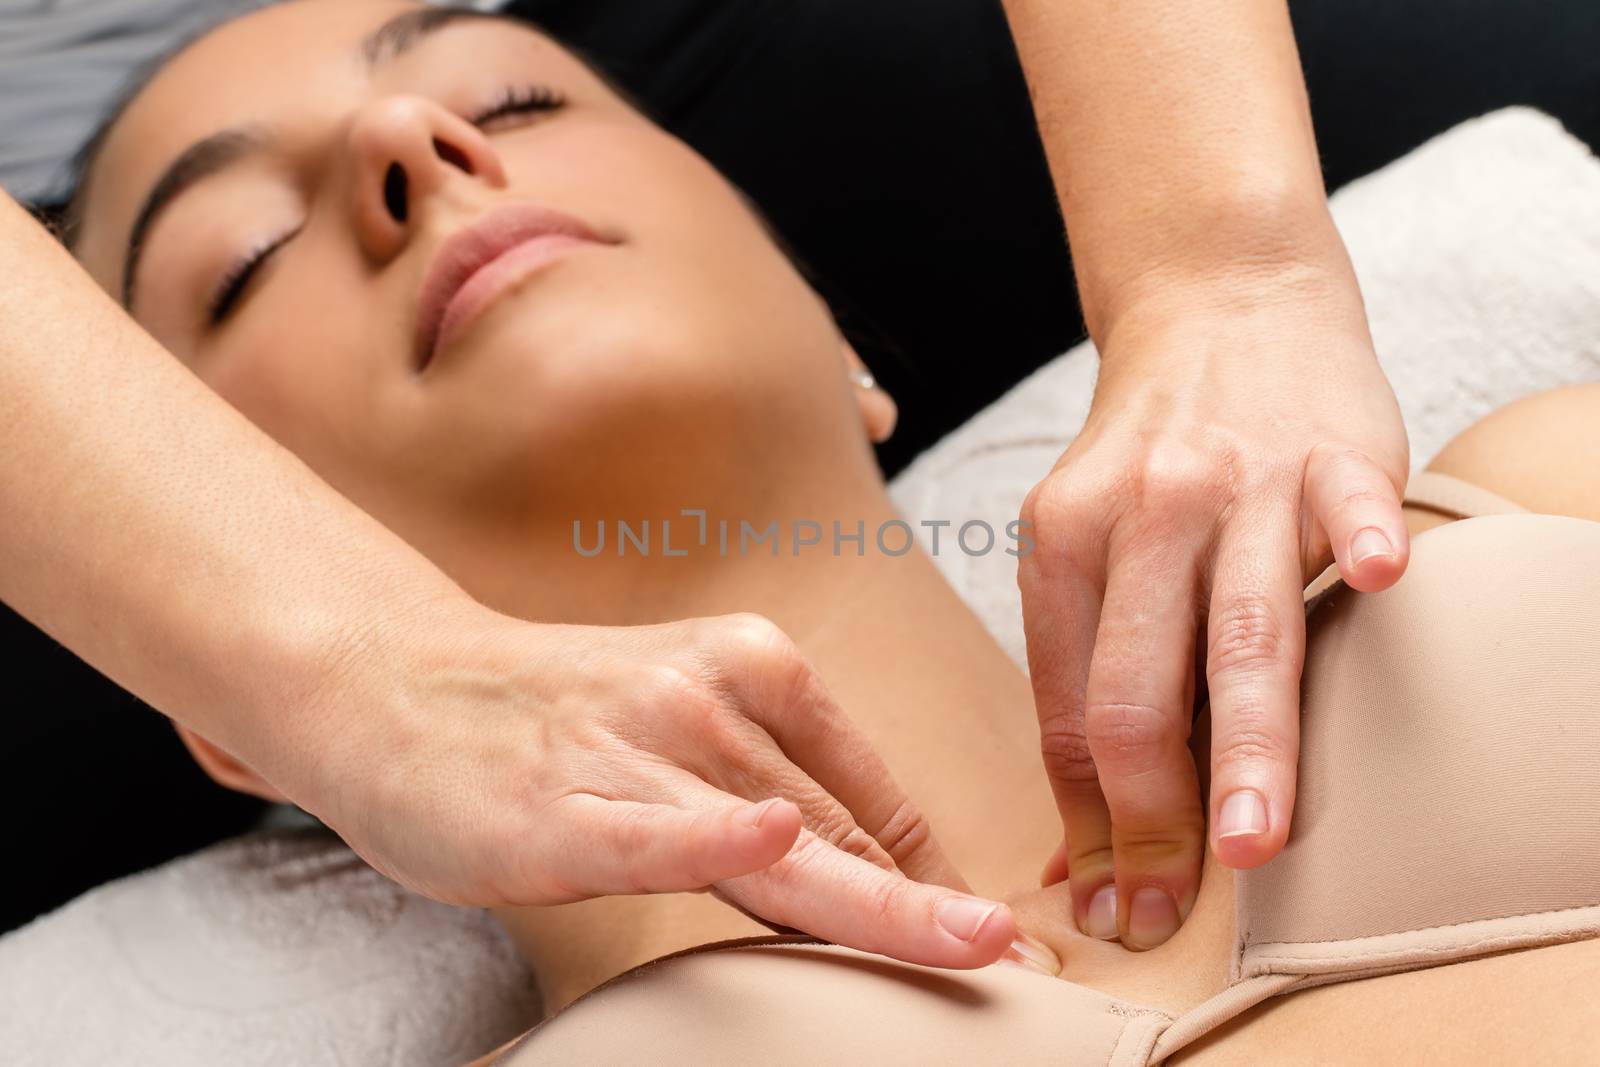 Chiropractor manipulating neuro lymphatic points on female chest by karelnoppe